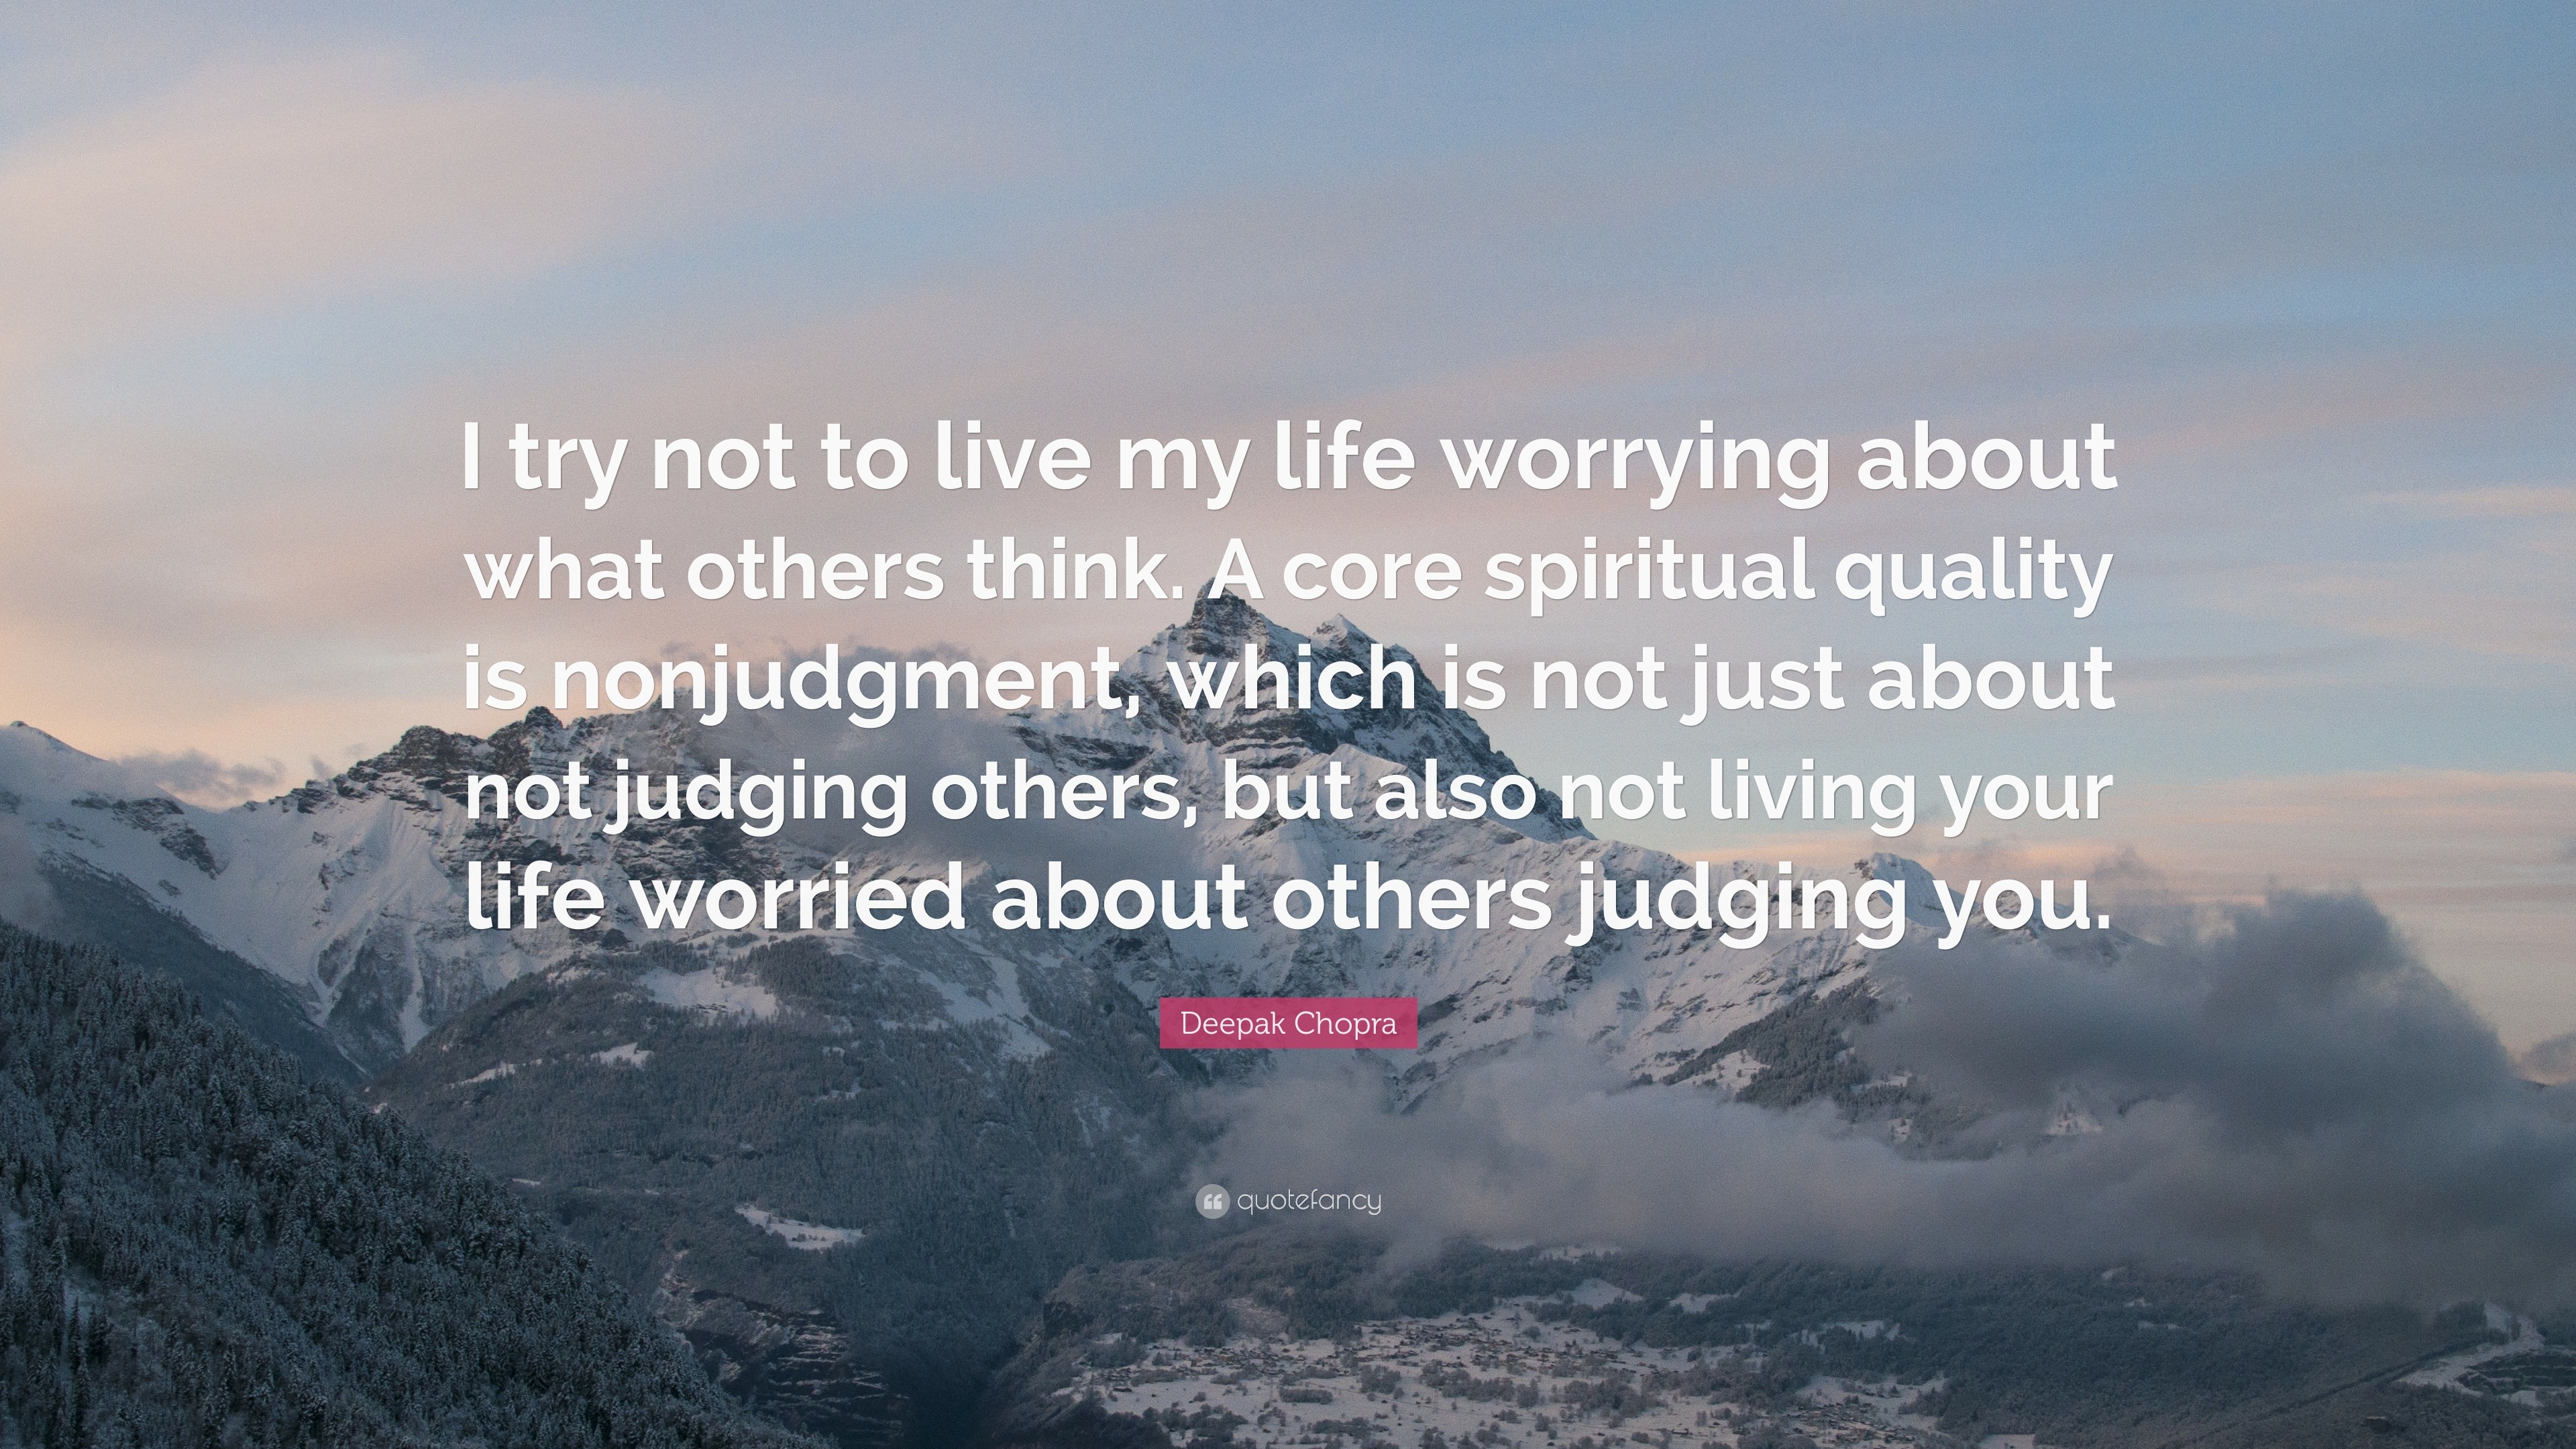 Deepak Chopra Quote “I try not to live my life worrying